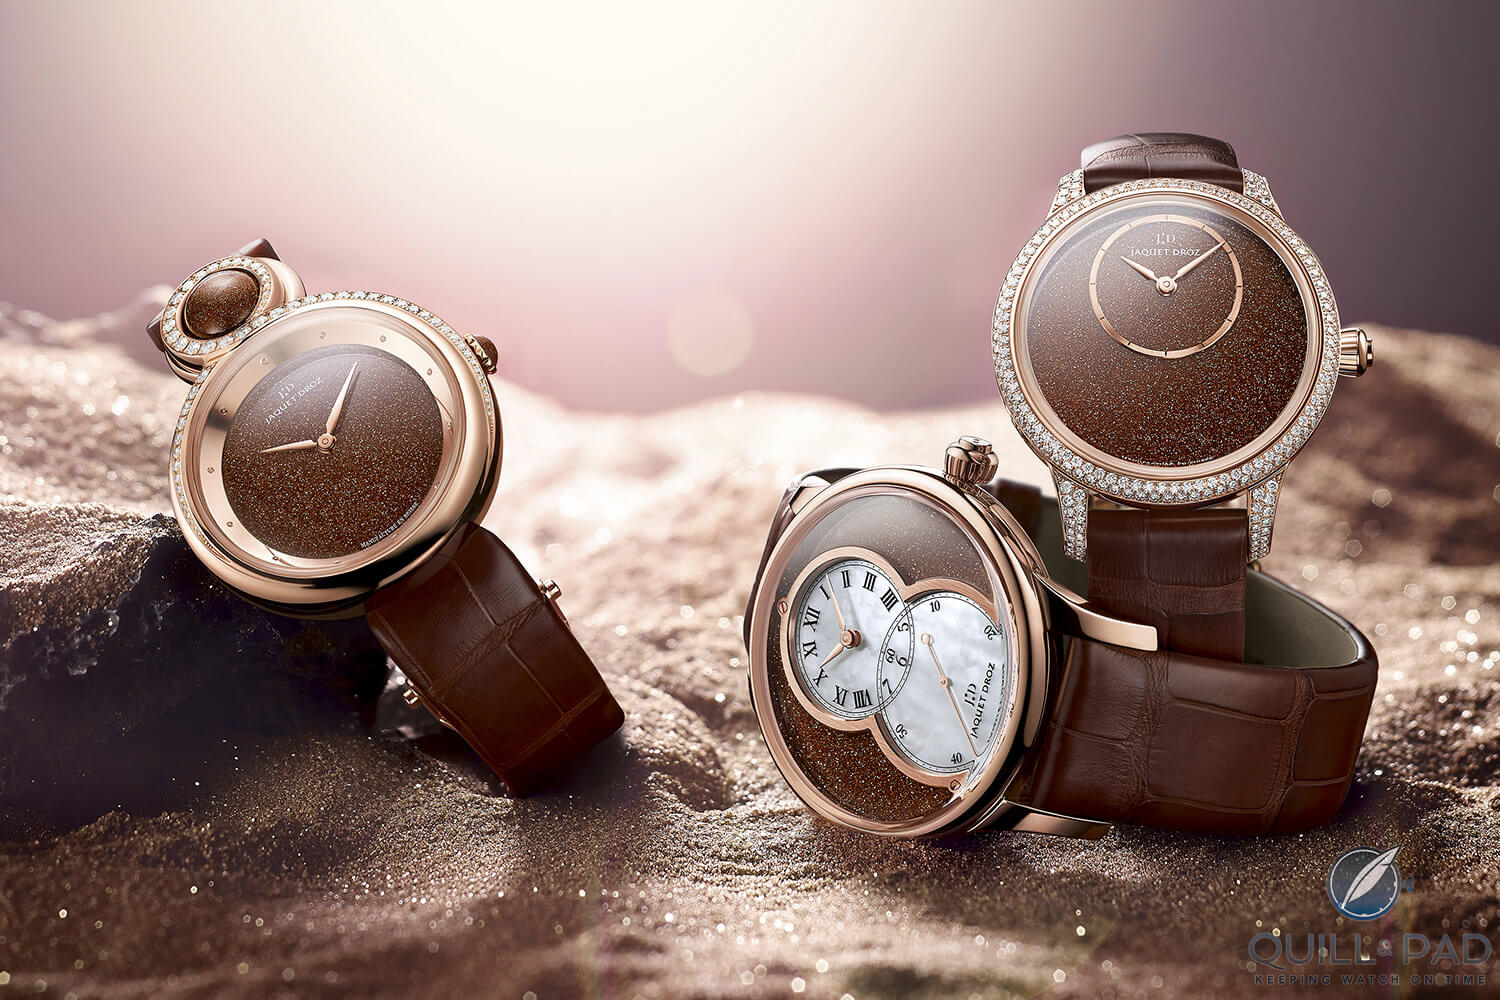 Trio of Jaquet Droz Sunstone watches from 2015: (L to R) Lady 8, Grande Seconde Cerclée, Petite Heure Minute 35 mm